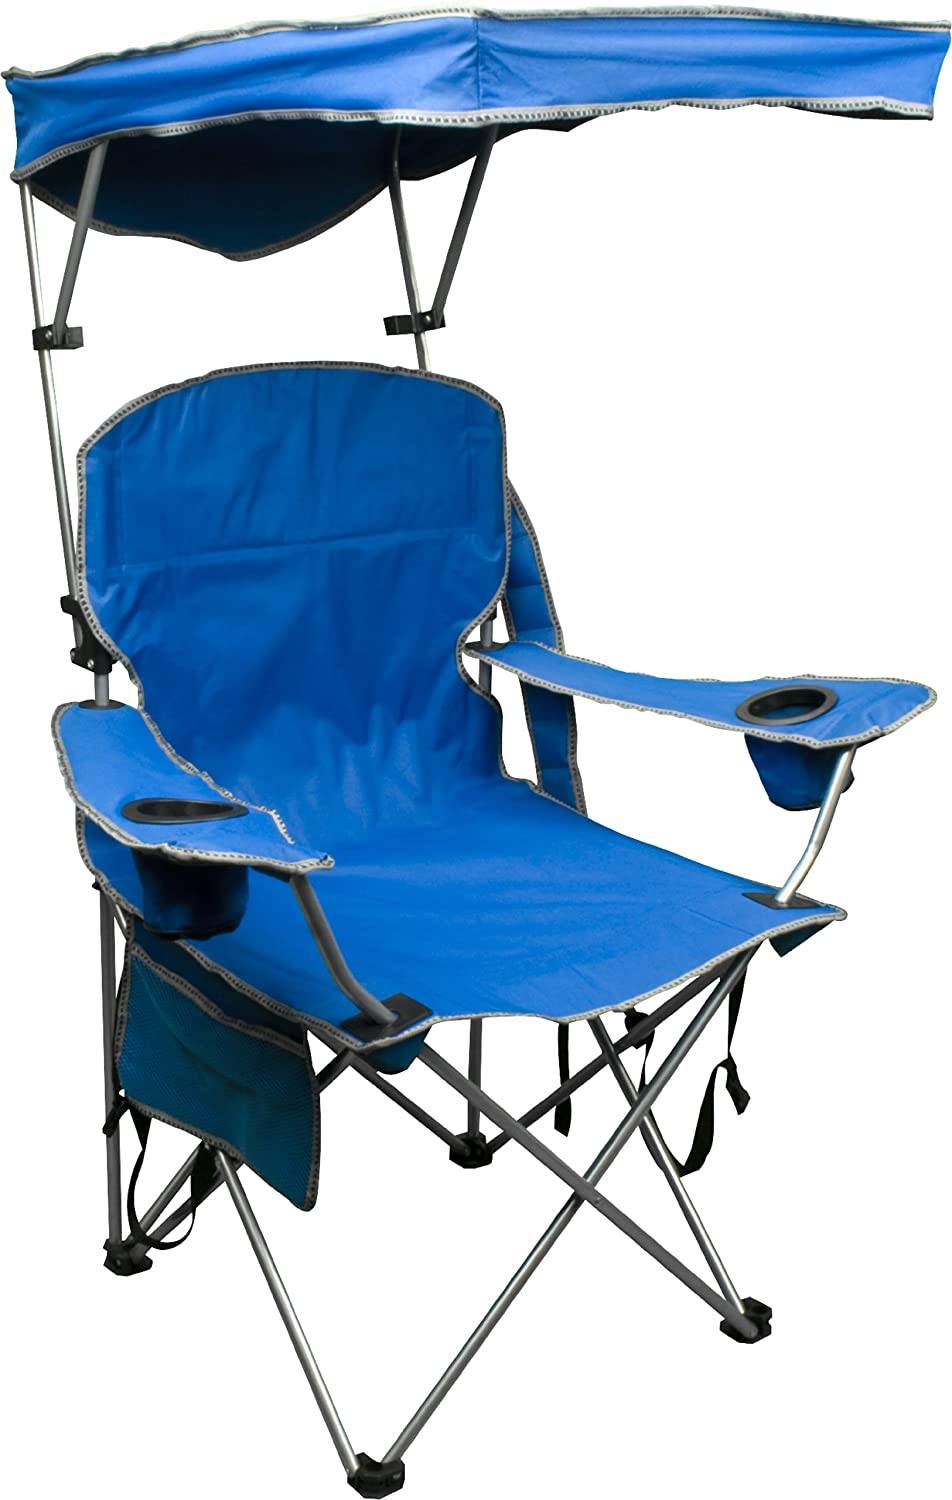 Quik Shade Adjustable Canopy Camp Chair